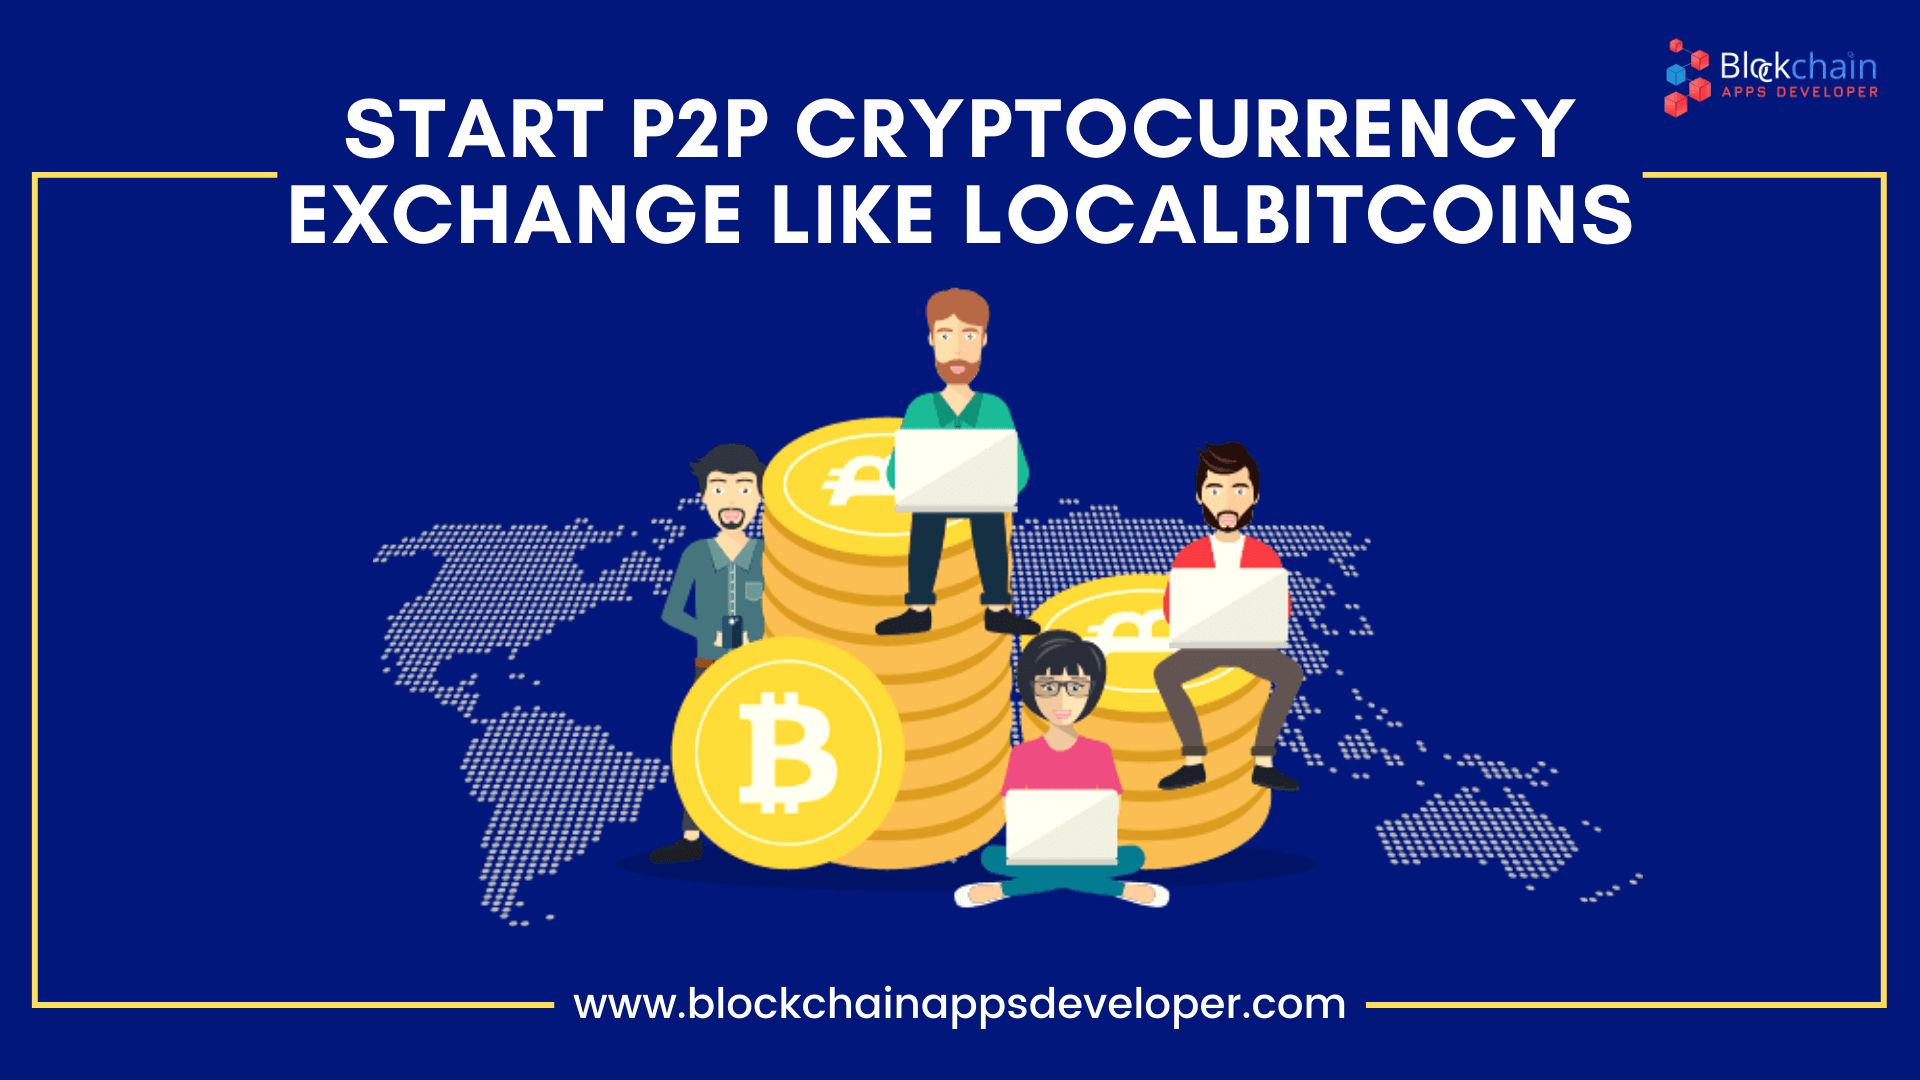 Article about Make an escrow-based P2P exchange like LocalBitcoins